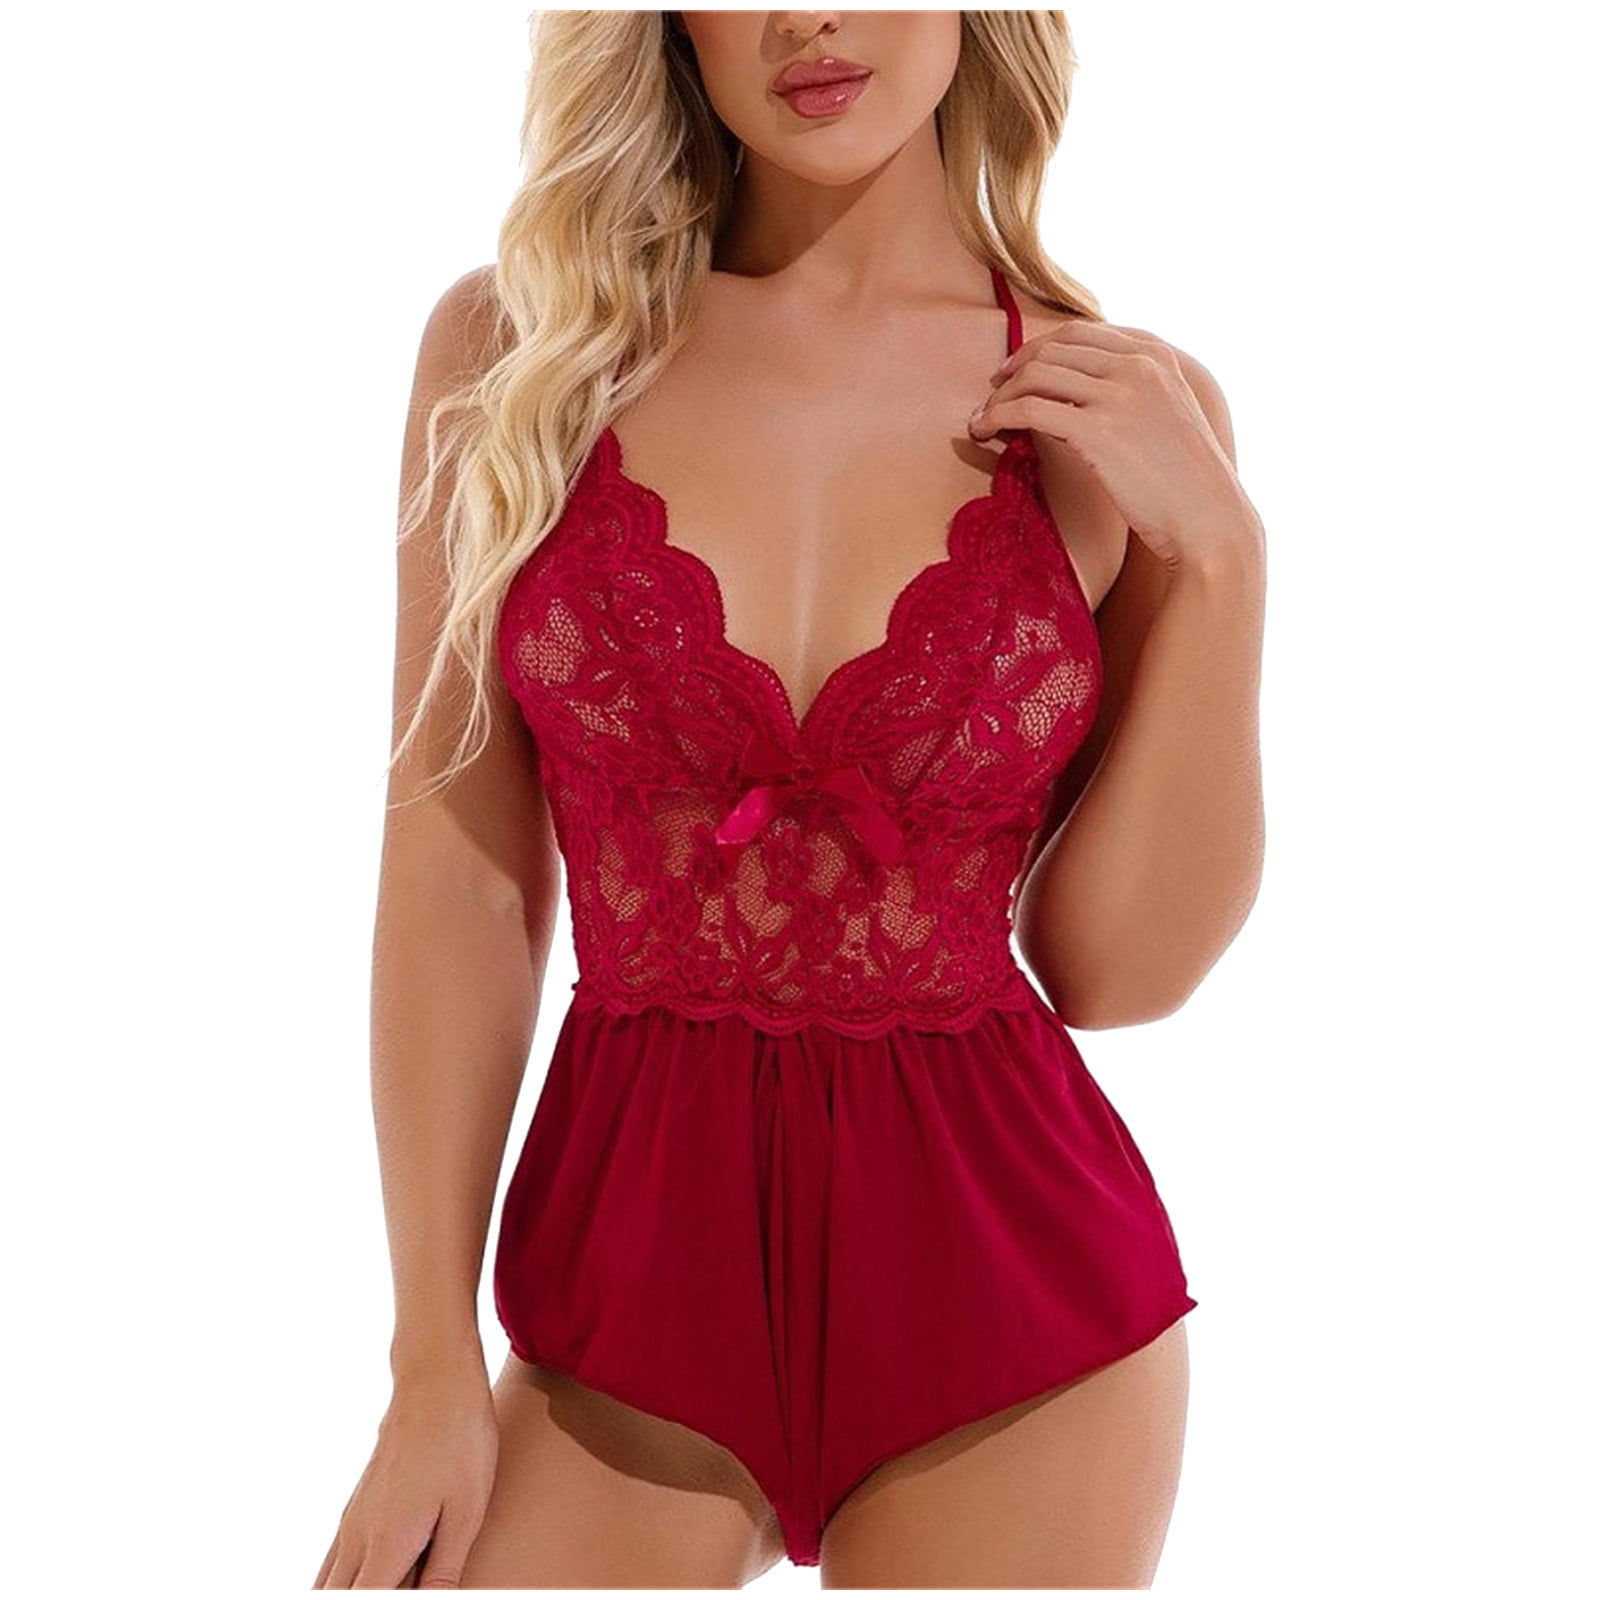 RQYYD Clearance Women Plus Size Lingerie Teddy Bodysuit with